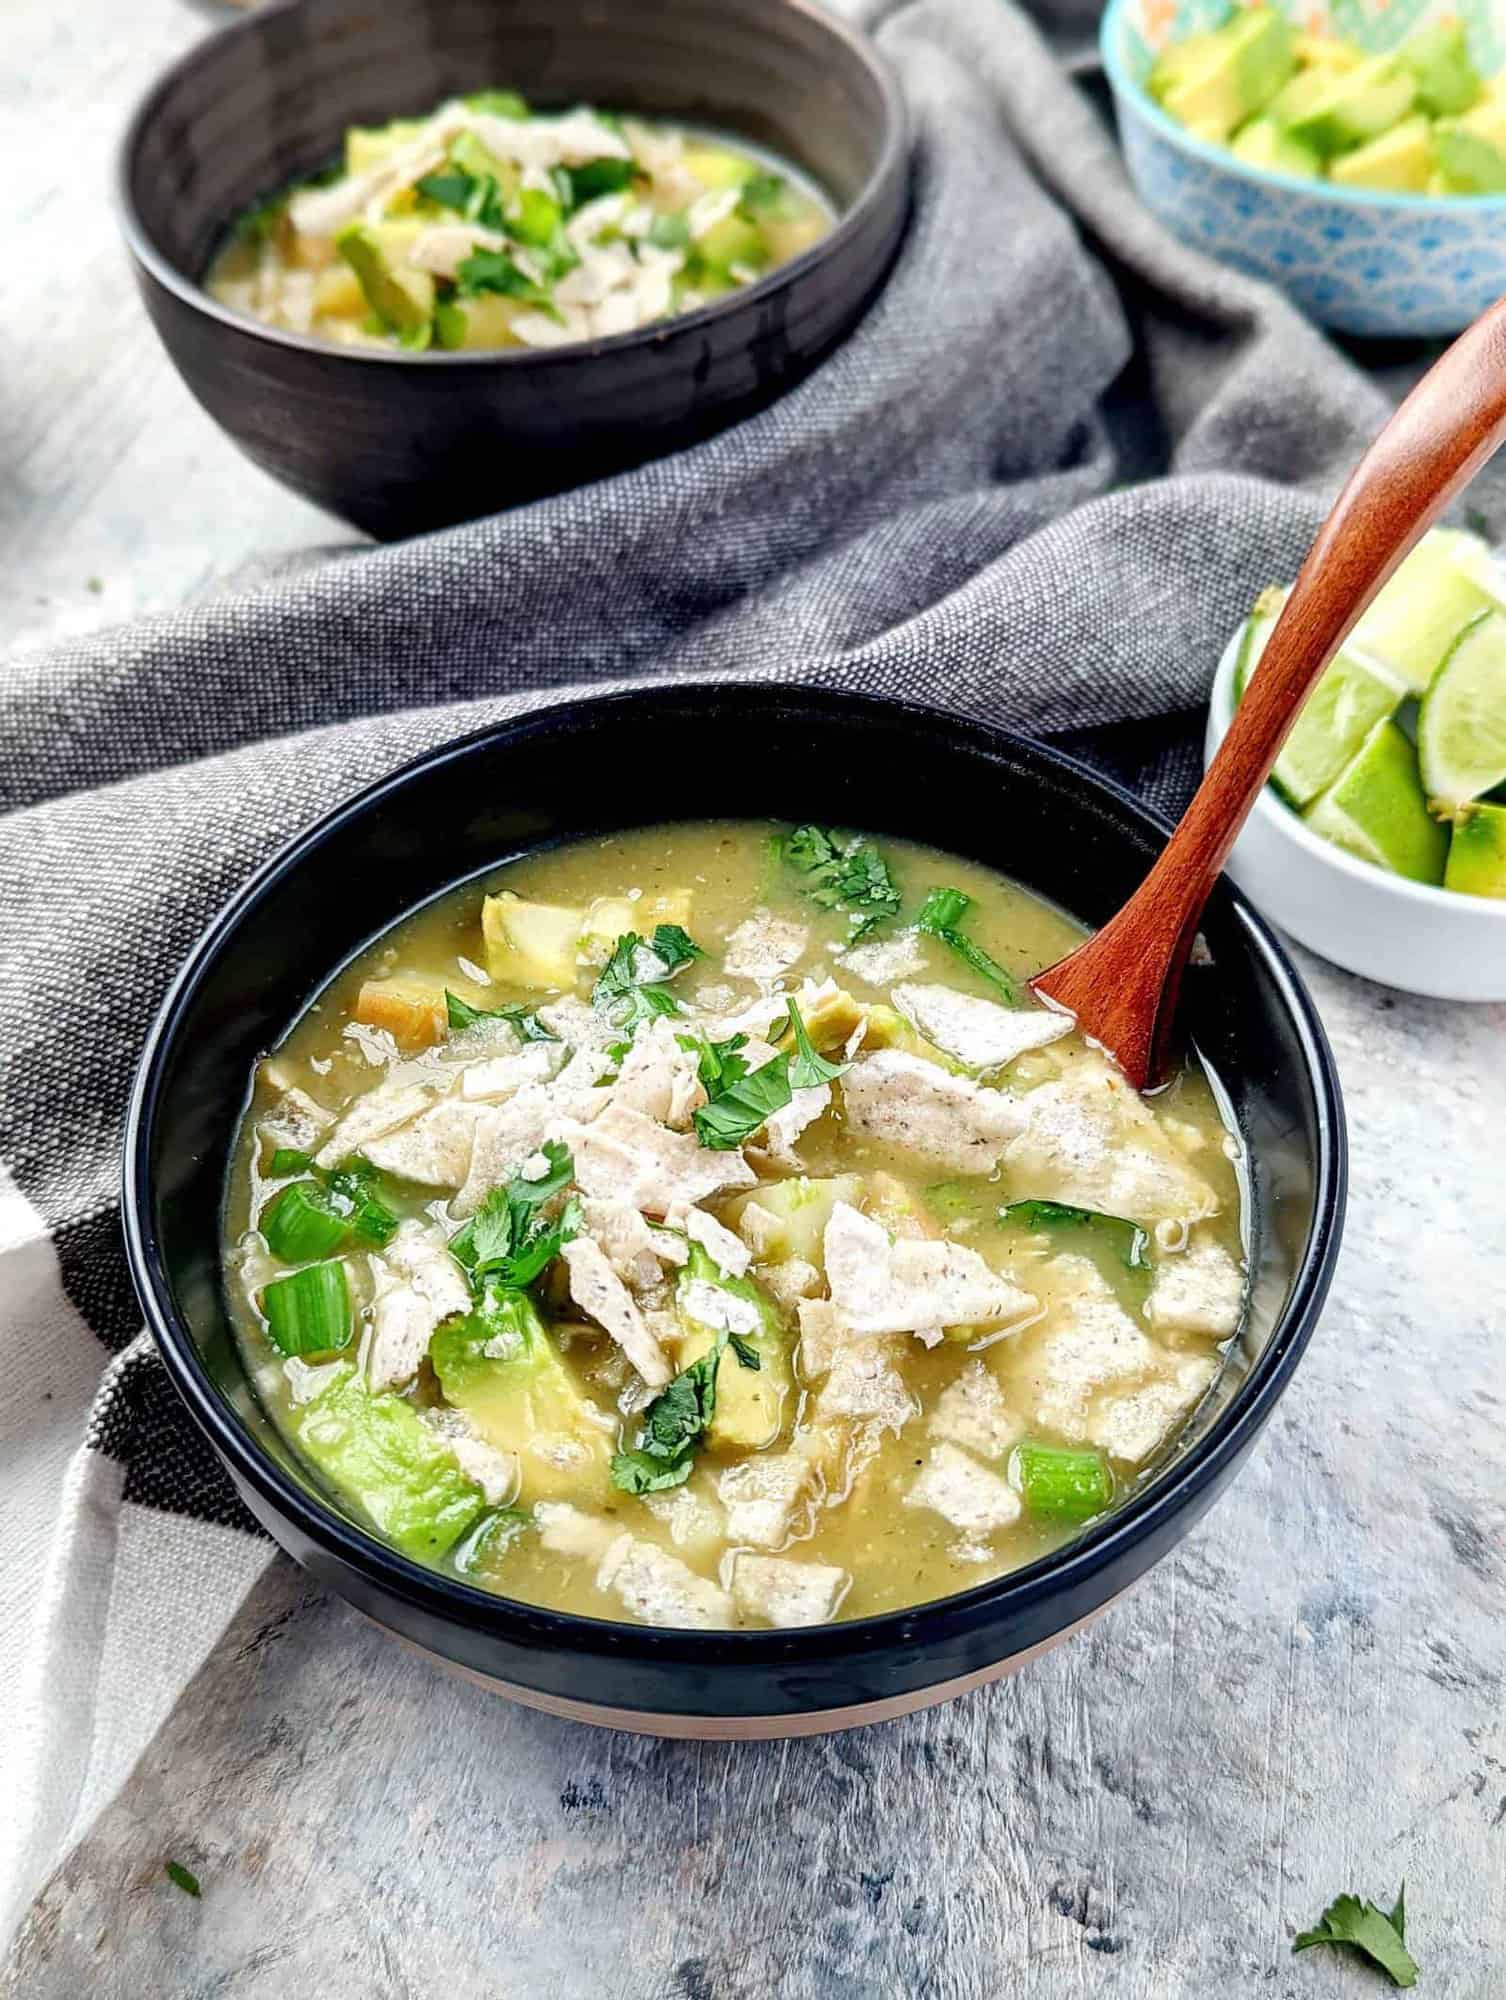 nightshade free green chicken enchilada soup in 2 black bowls with wooden spoons and bowls of avocados and limes in the background.